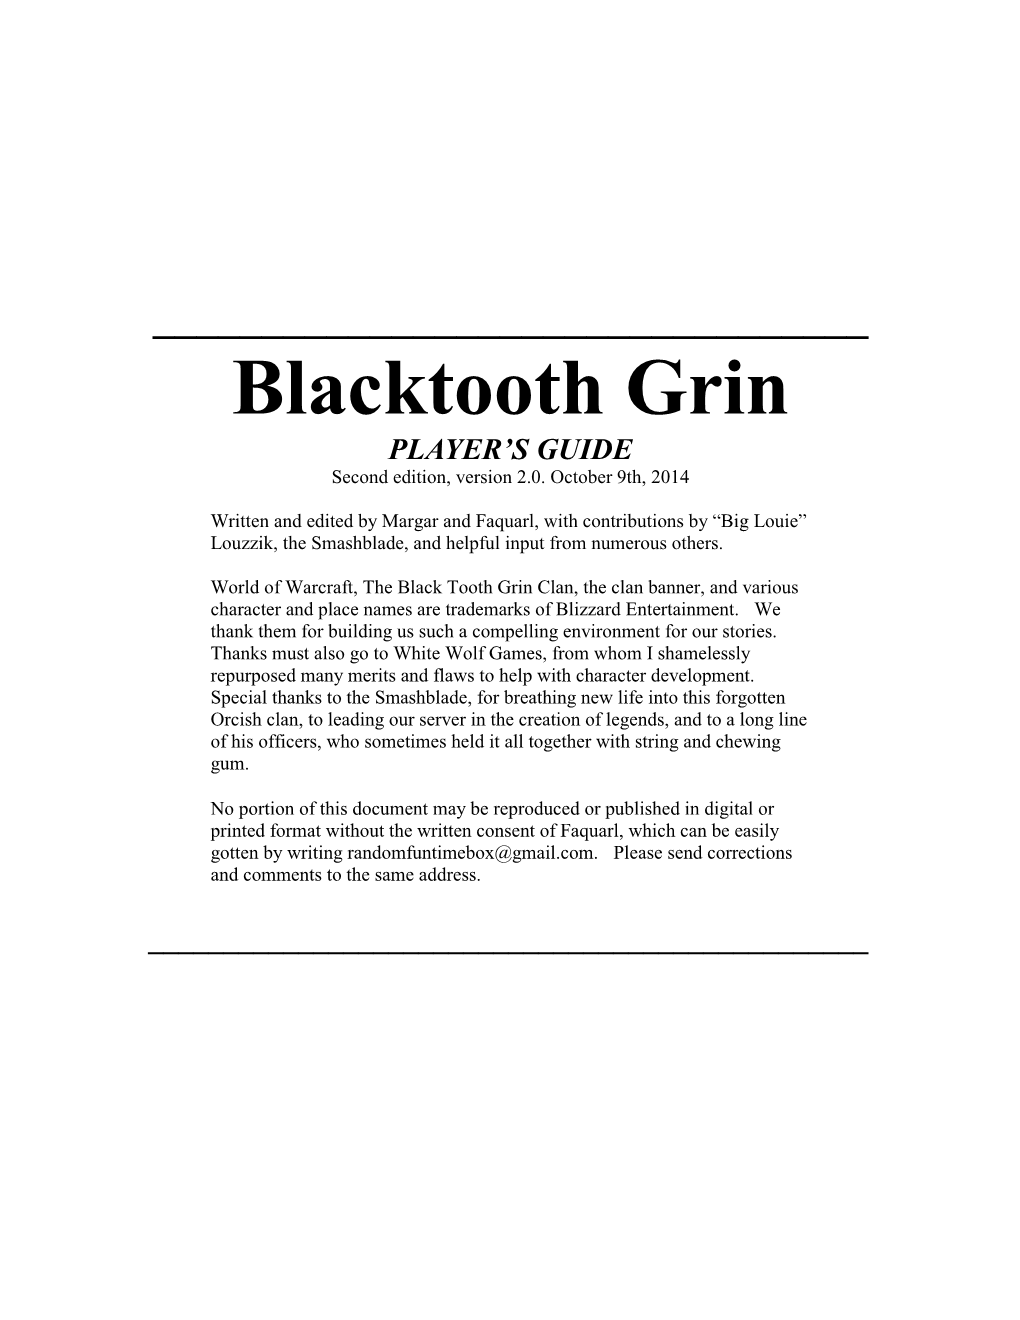 Blacktooth Grin PLAYER’S GUIDE Second Edition, Version 2.0